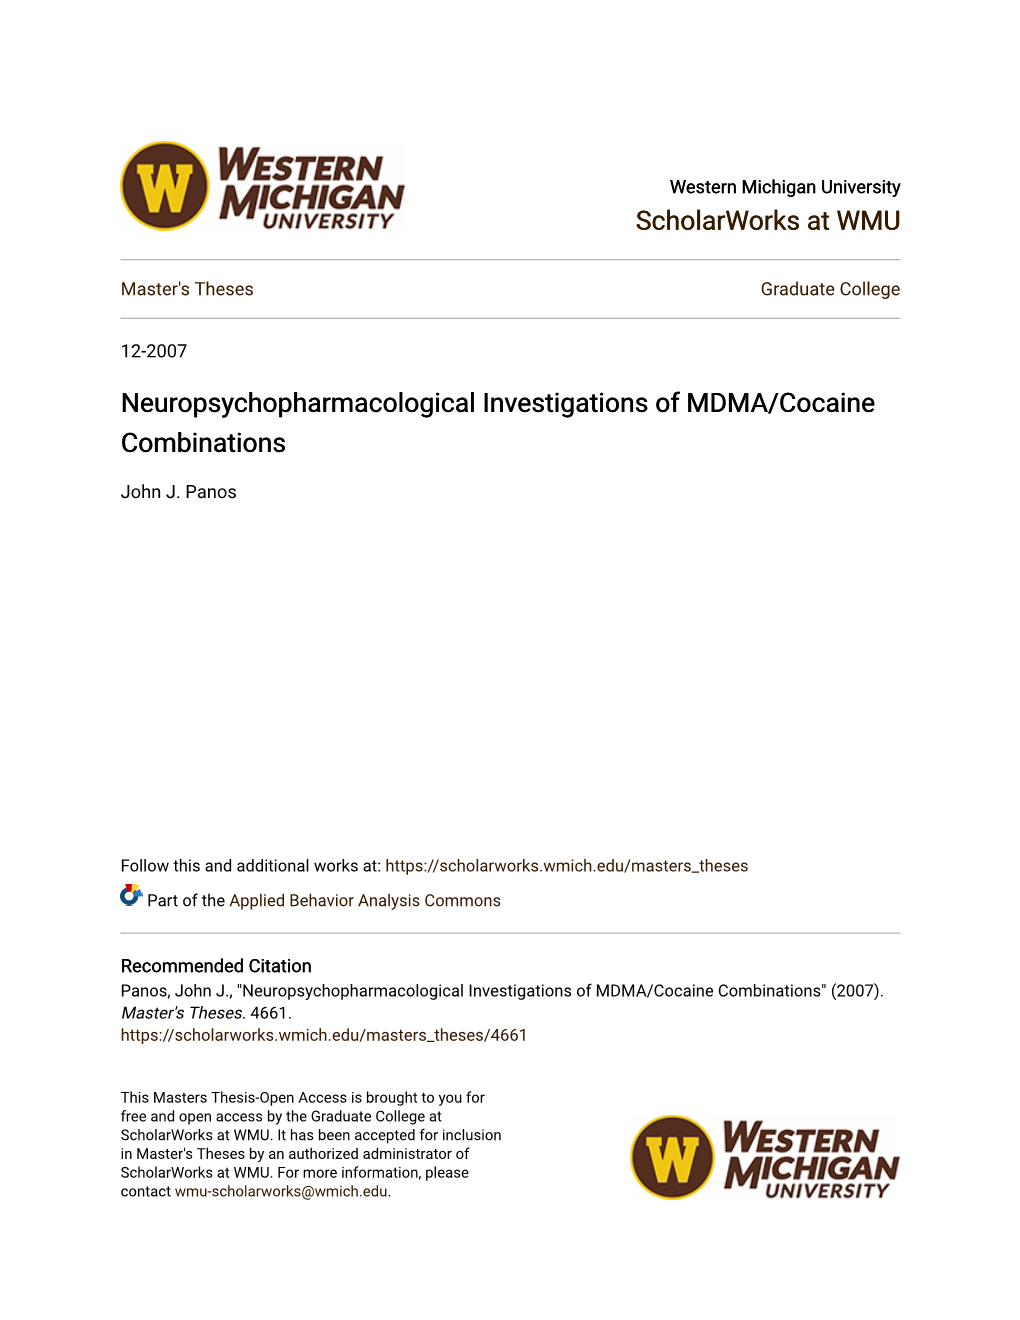 Neuropsychopharmacological Investigations of MDMA/Cocaine Combinations